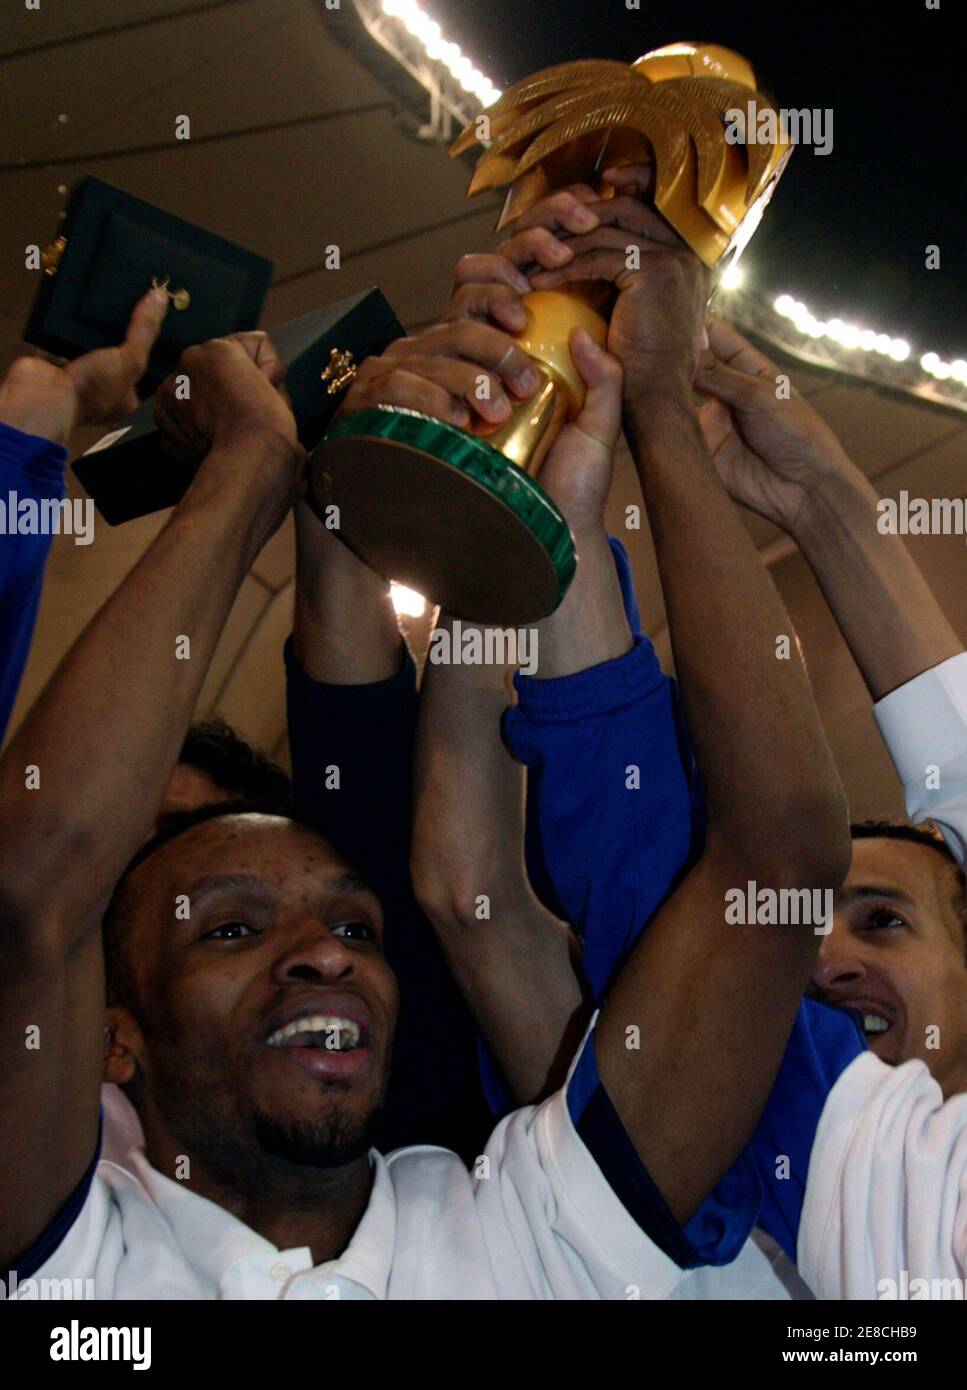 Al Hilal's players celebrate with the Saudi Crown Prince Cup trophy after their victory over Al Etafaq in the final soccer match in Riyadh March 7, 2008. REUTERS/Fahad Shadeed   (SAUDI ARABIA) Stock Photo